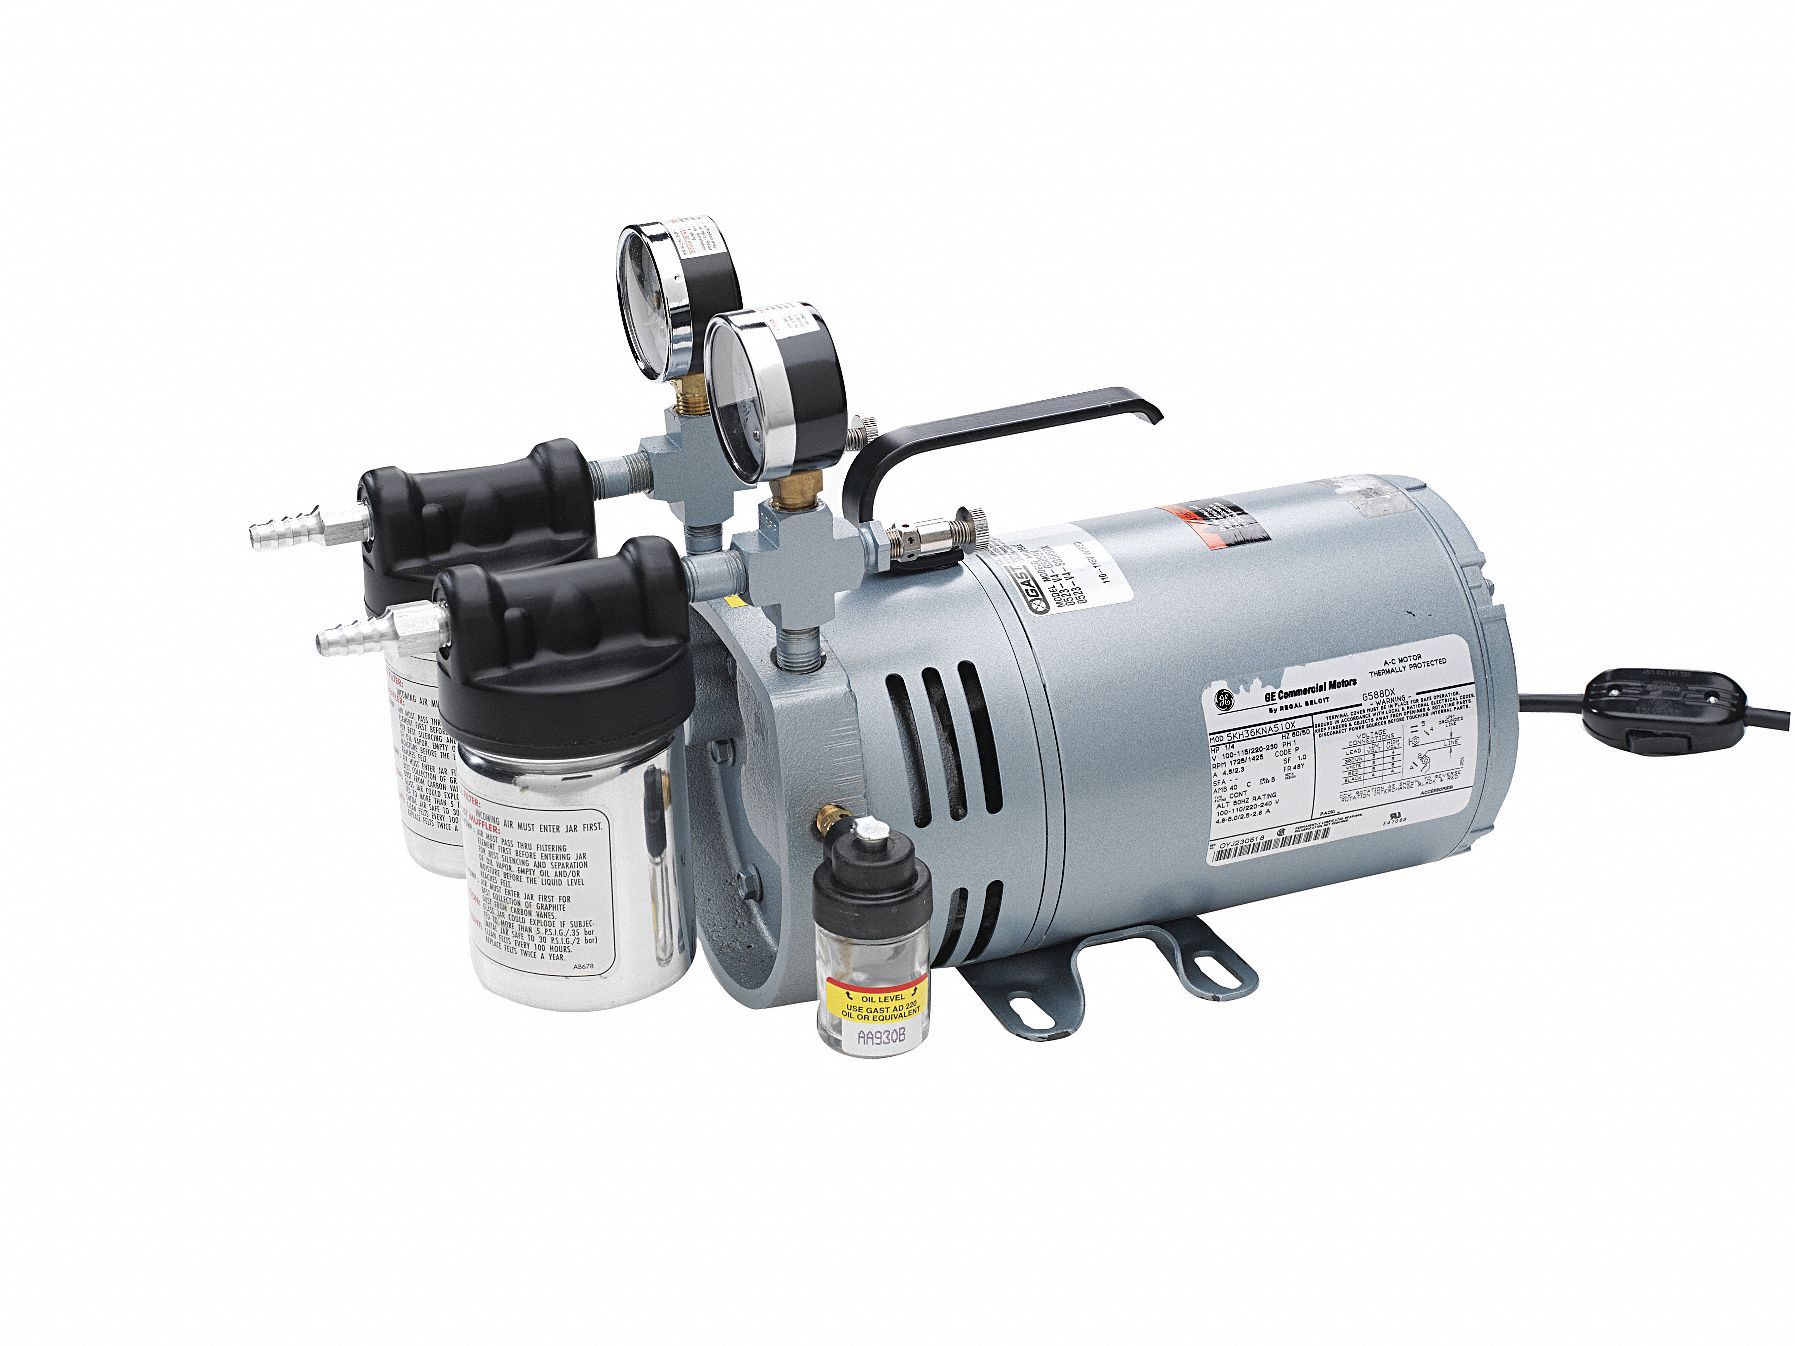 1/4" In and 1/4" out 1/4 HP Compressor/Vacuum Pump 